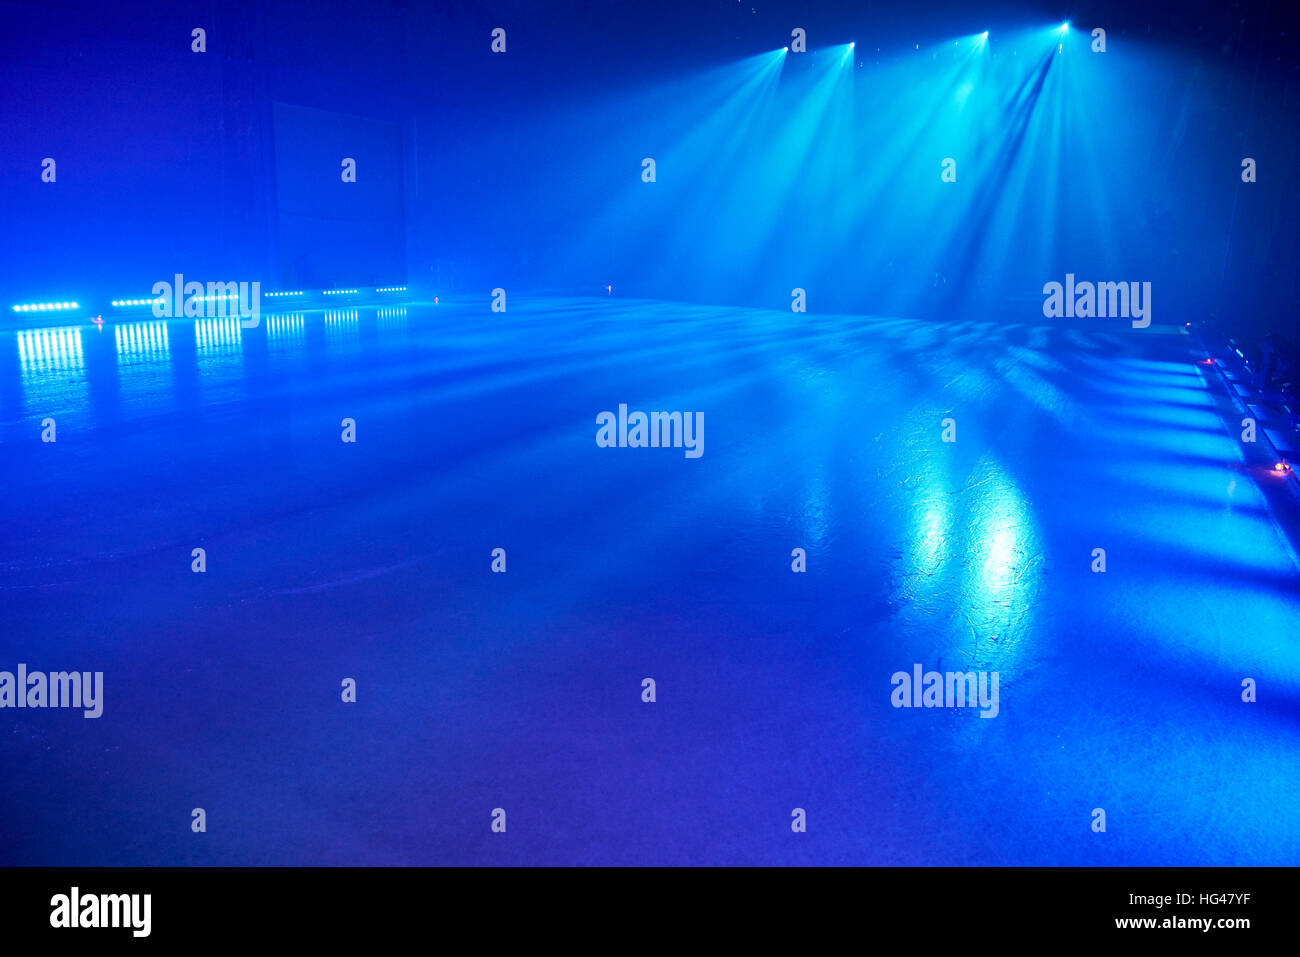 ice floor with stage spotlights for ice dancing. Stock Photo